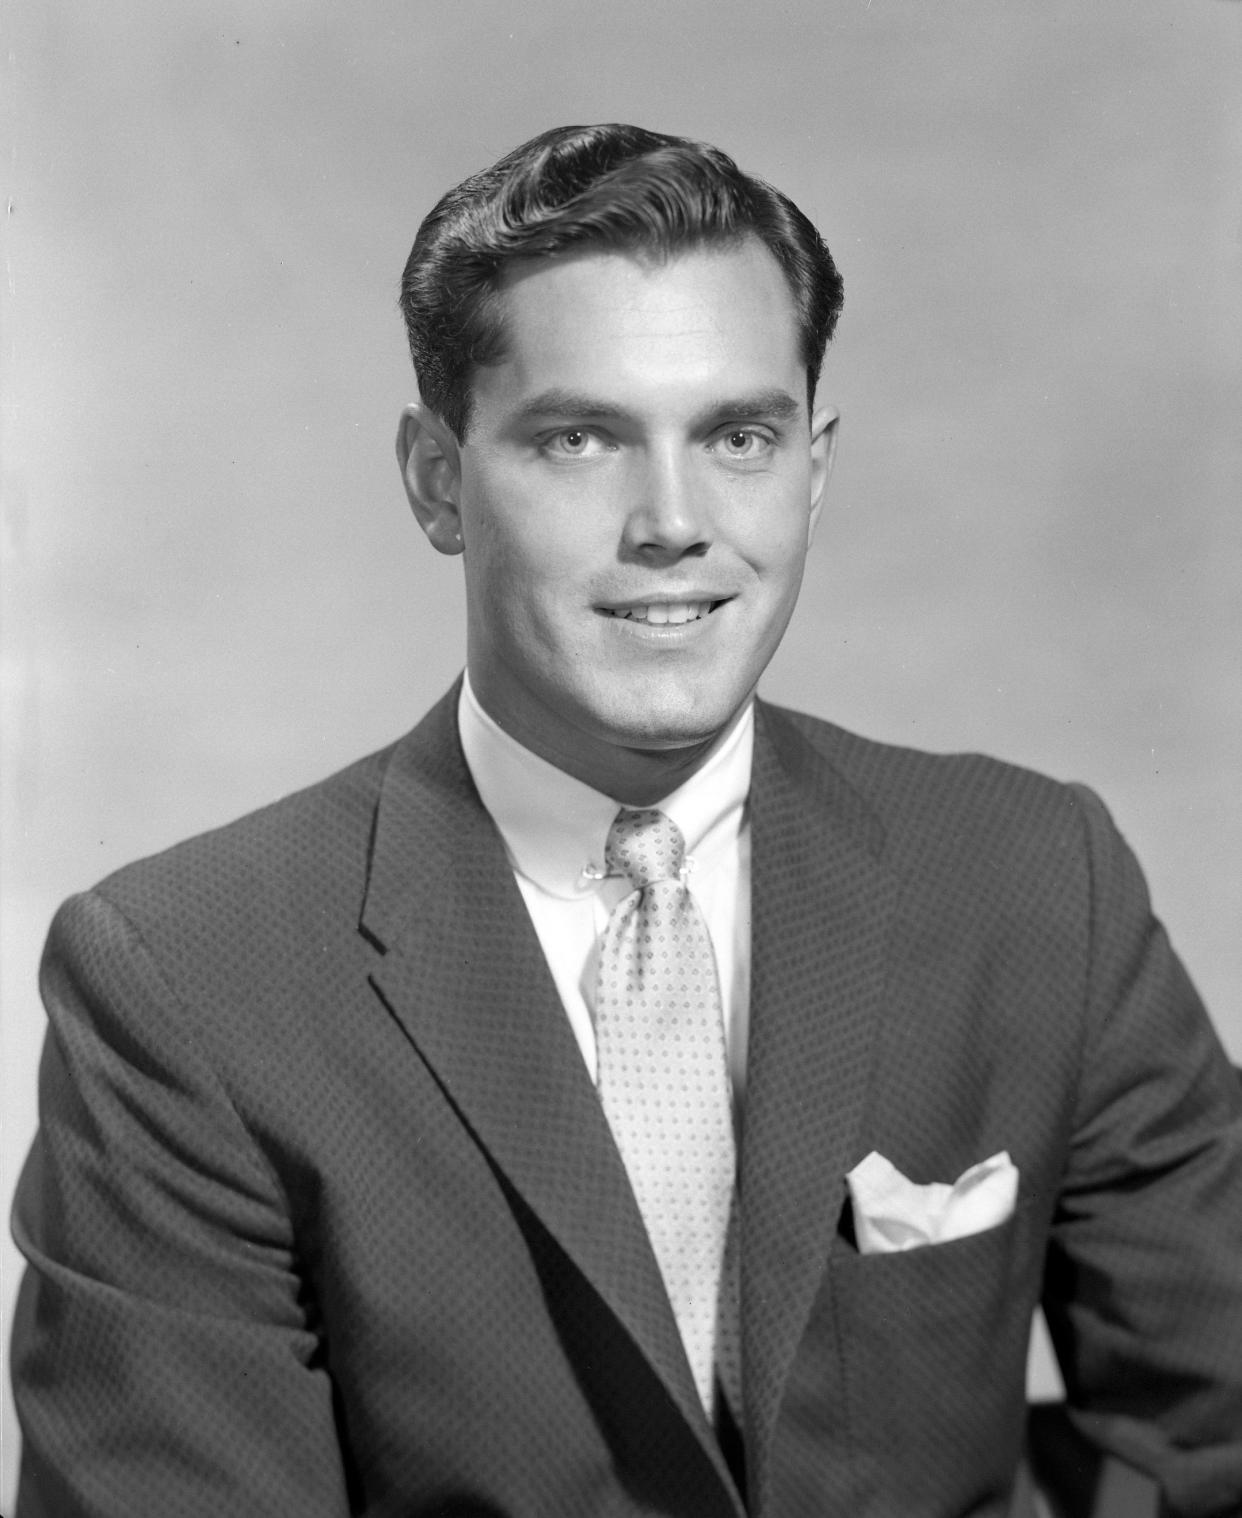 Actor Jeffrey Hunter stops by The Milwaukee Journal for a portrait in 1956, the same year he co-starred opposite John Wayne in "The Searchers." Hunter grew up in Whitefish Bay, a North Shore Milwaukee suburb.